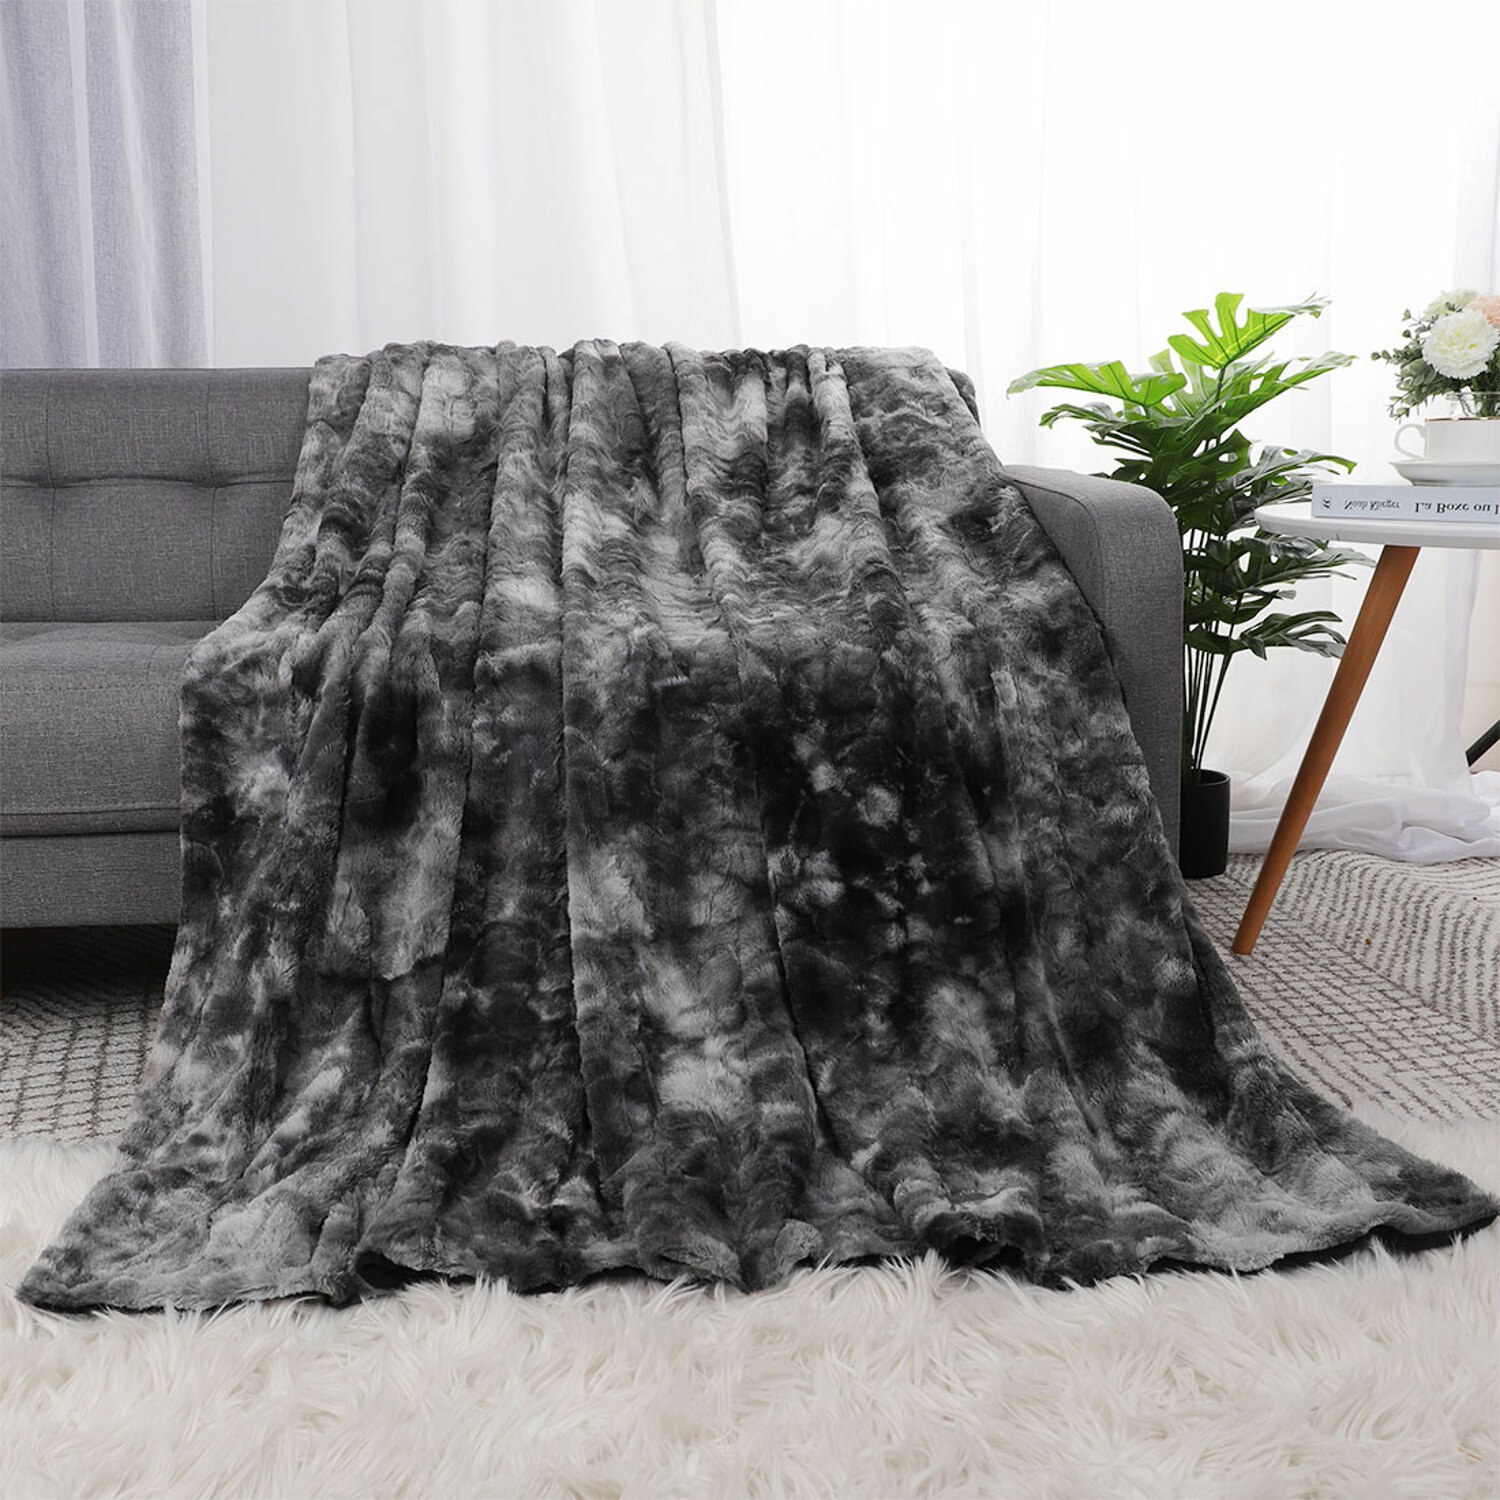 PiccoCasa Double Sided Faux Fur Blanket 50"x60" Long Shaggy Throw Blanket, Black - image 1 of 6